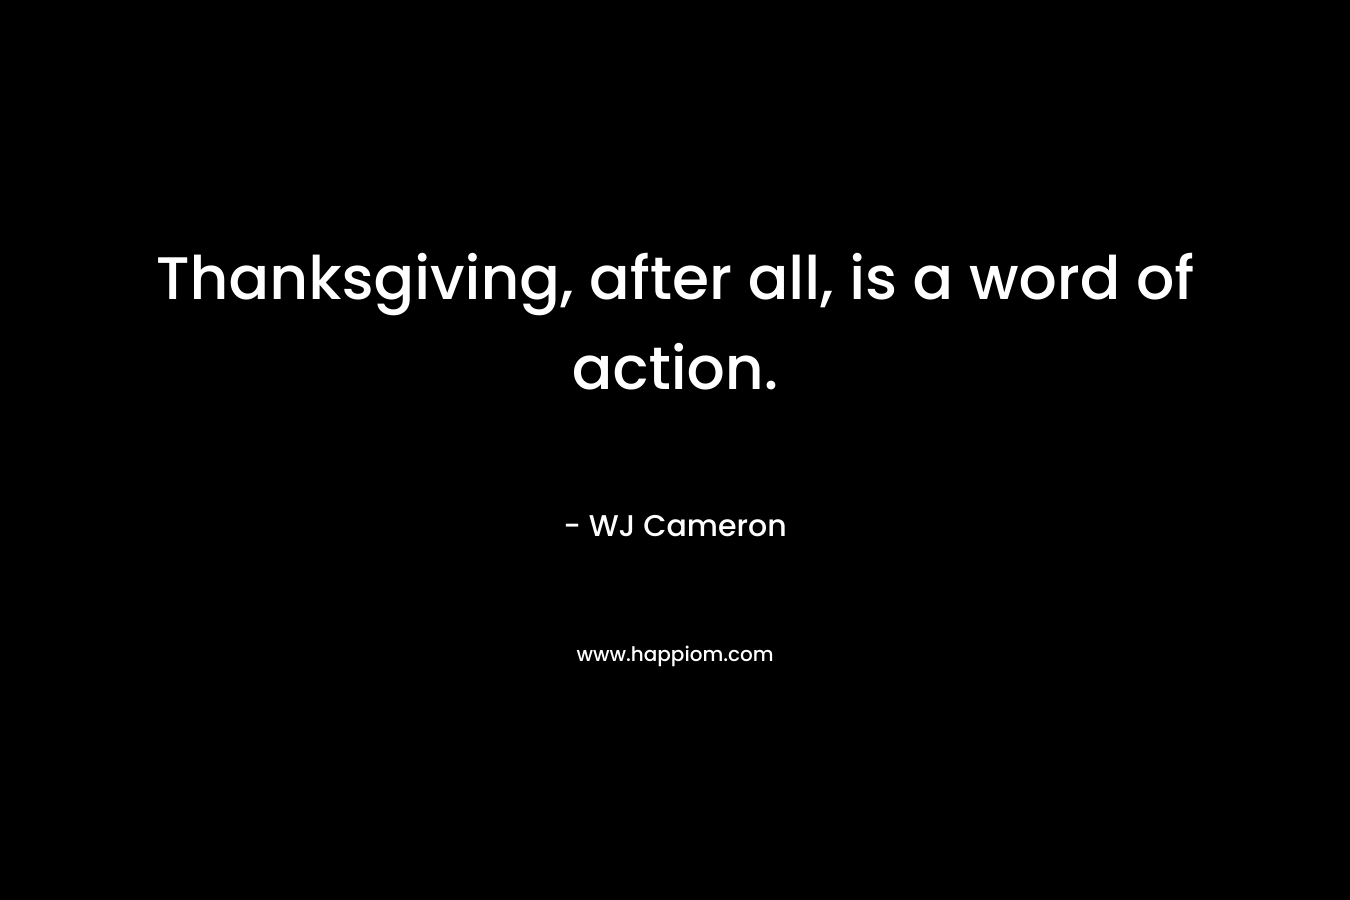 Thanksgiving, after all, is a word of action. – WJ Cameron